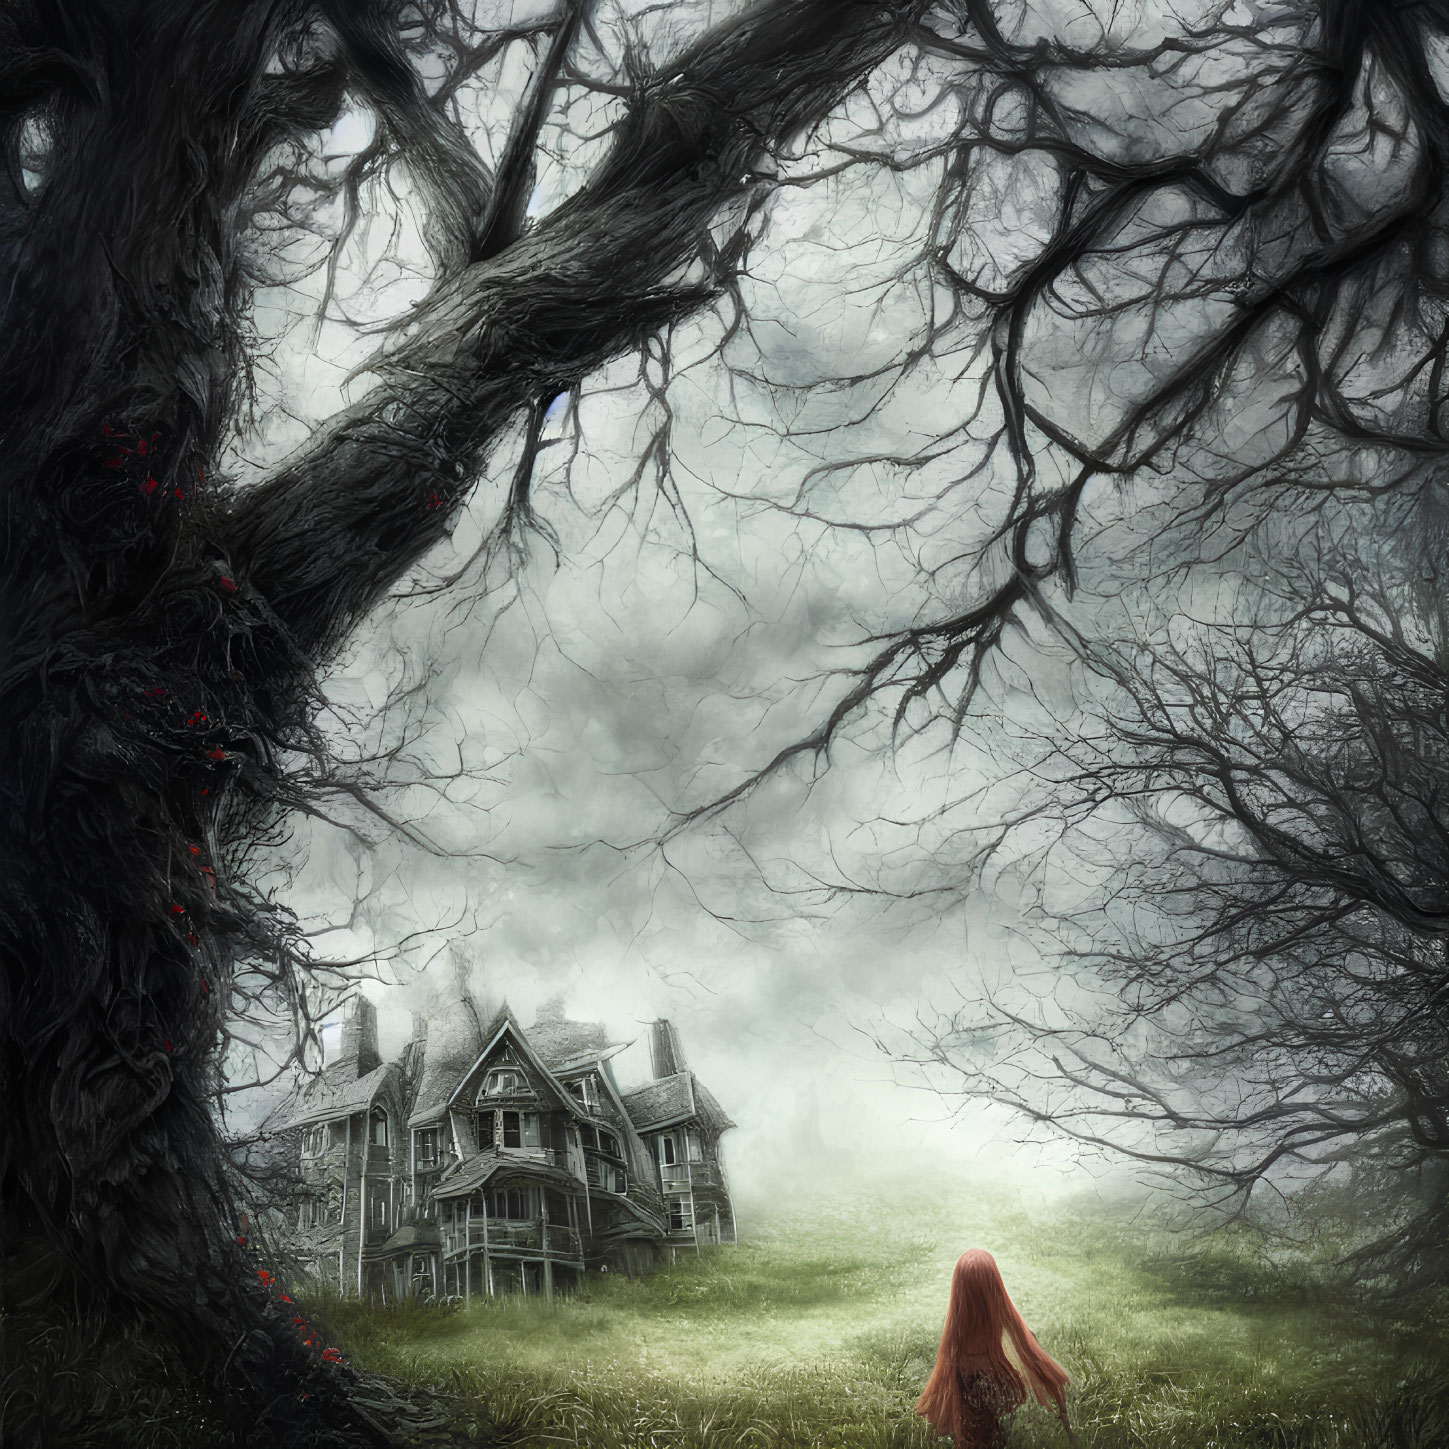 Red-haired person near eerie Gothic house in foggy landscape.